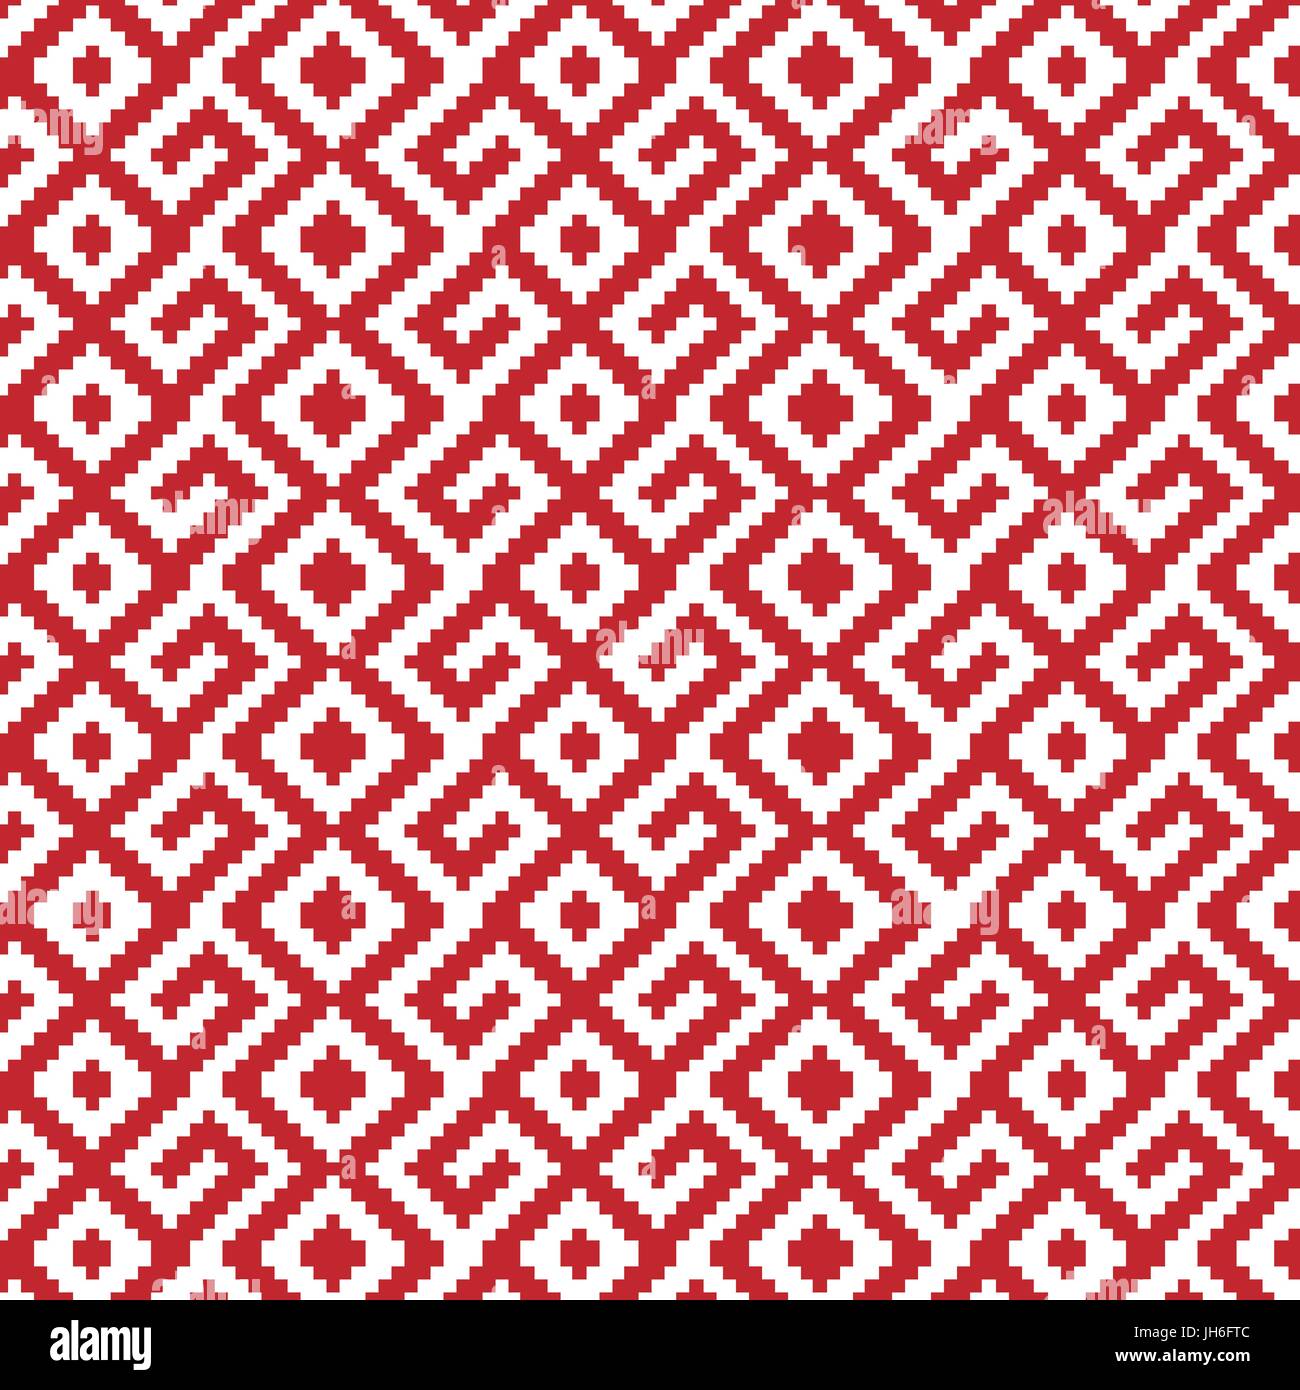 slavic ornament seamless vector pattern, red monochrome on transparent background, traditional ethnic ornament Stock Vector